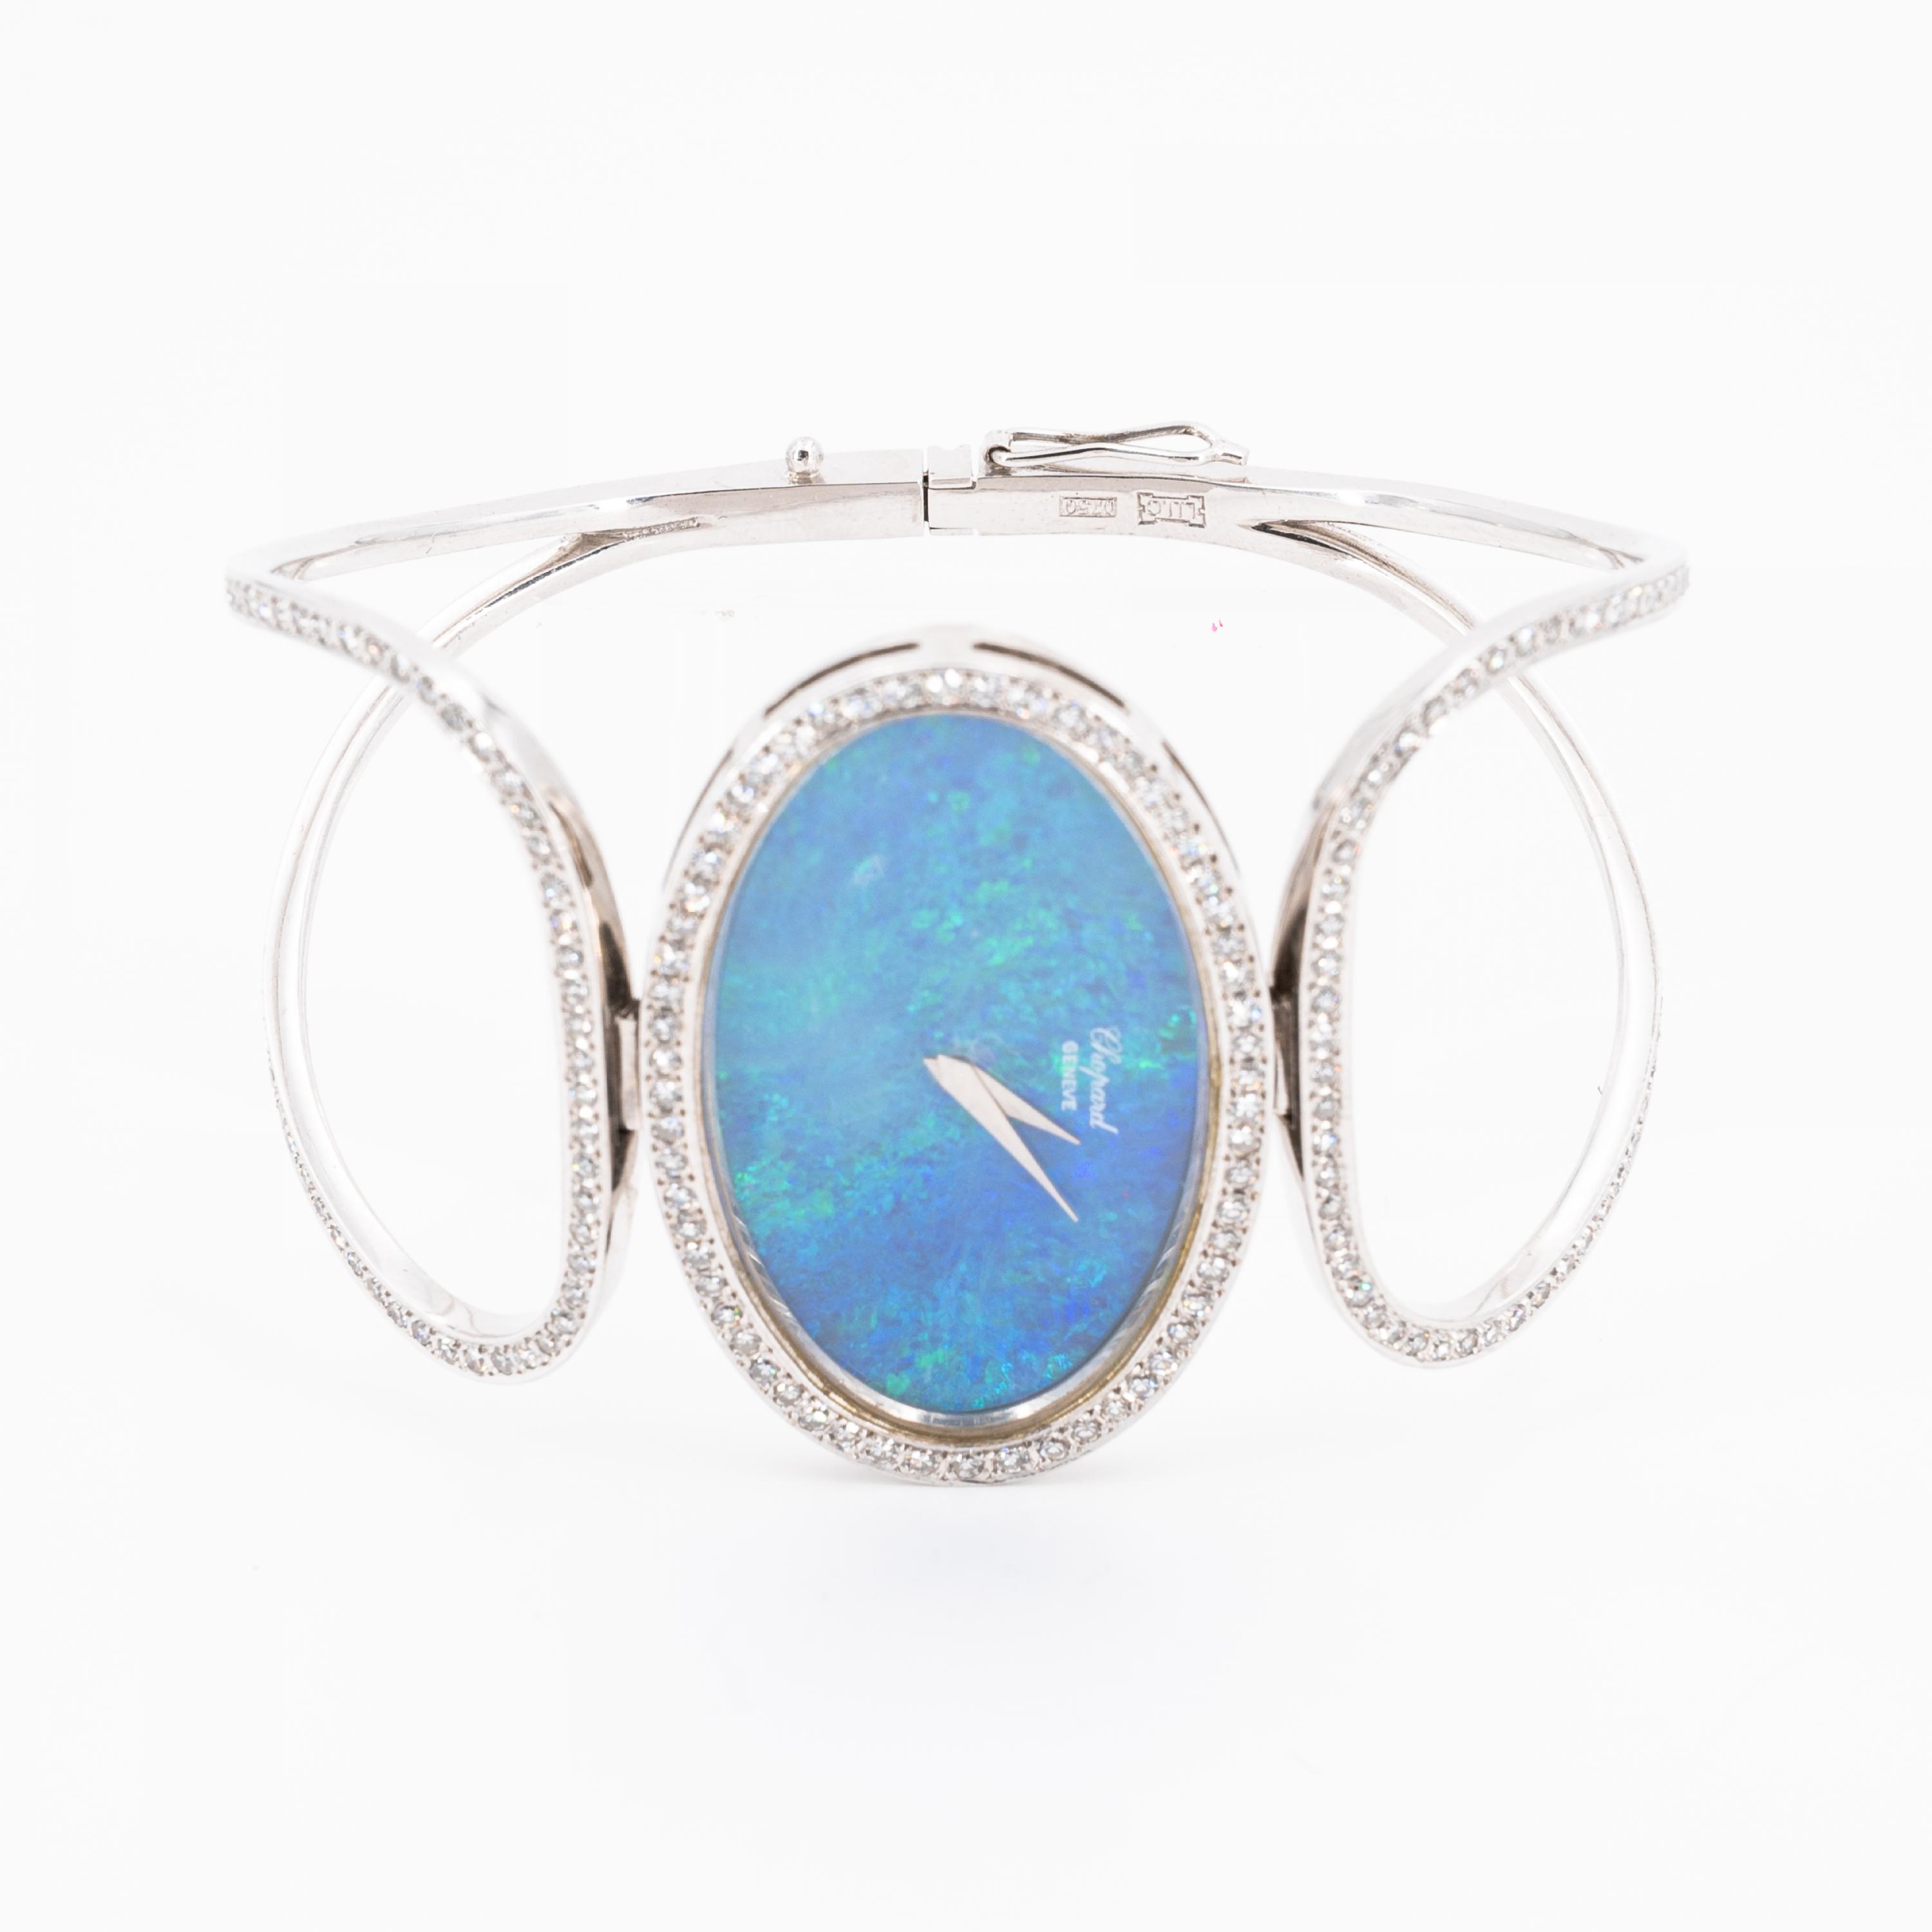 Chopard: Jewel Watch with Opal Dial - Image 2 of 7